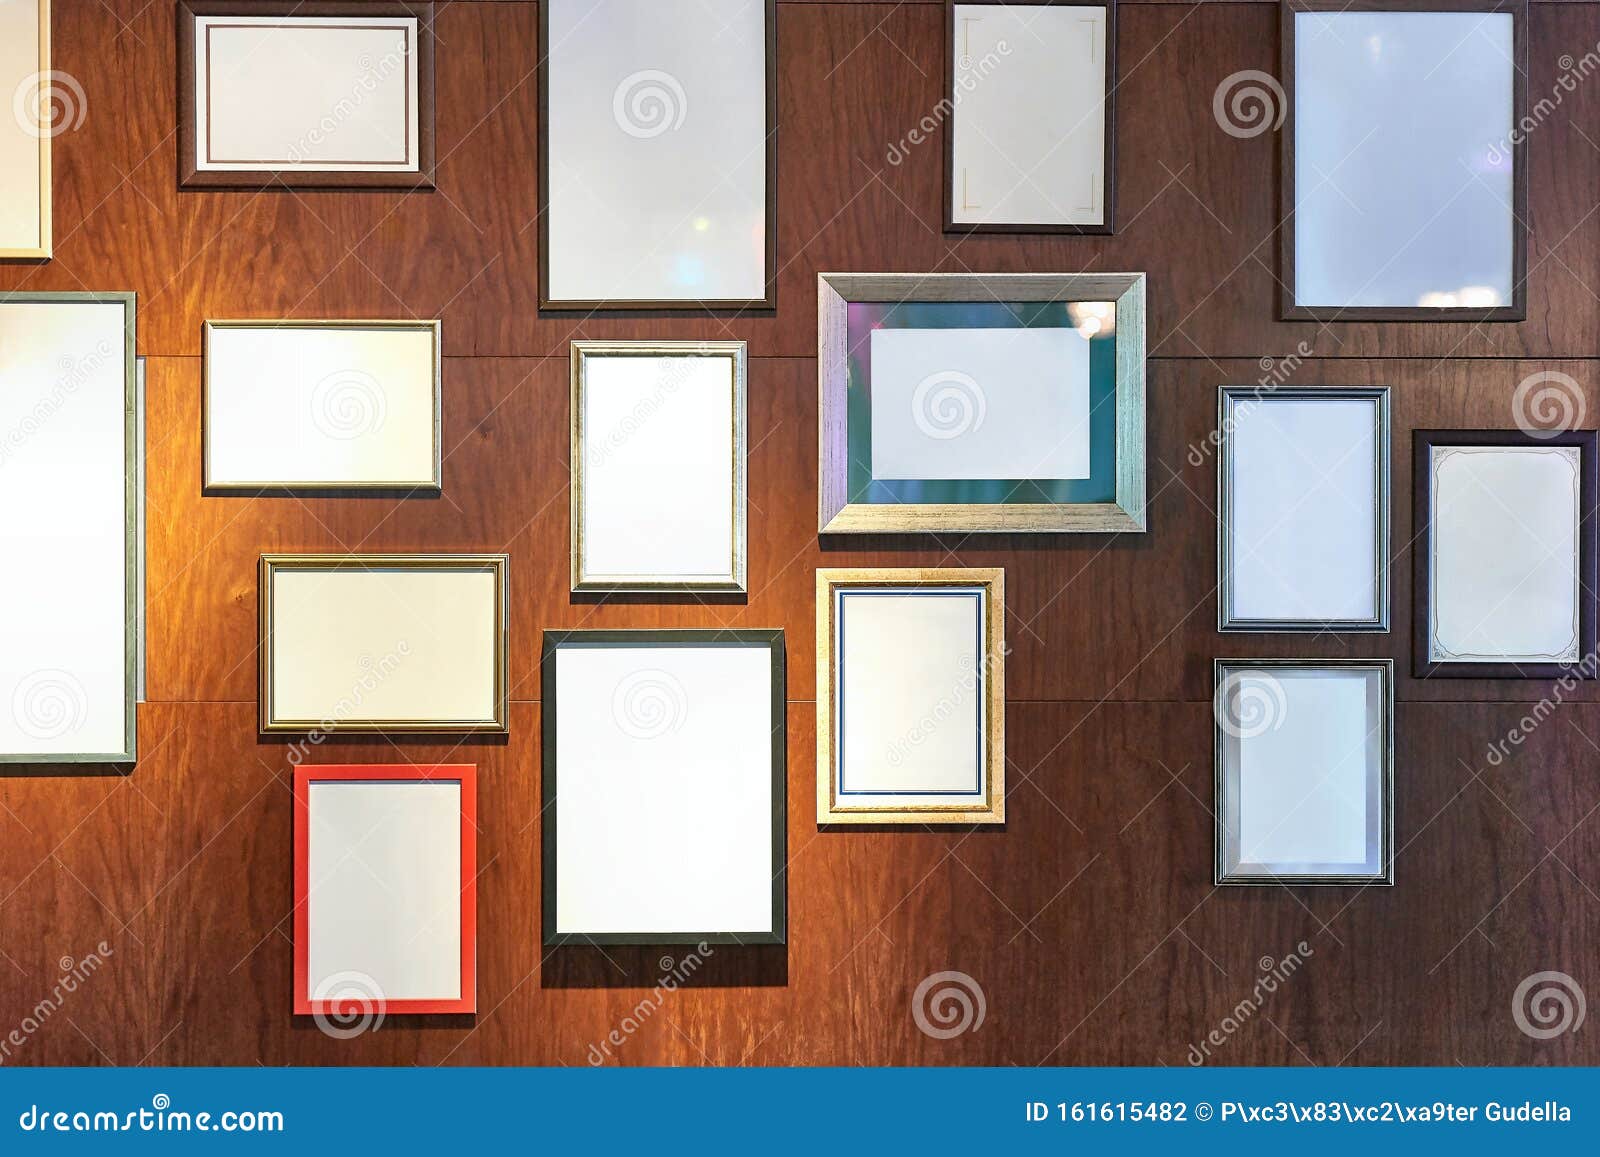 blank picture frames on a wall gallery